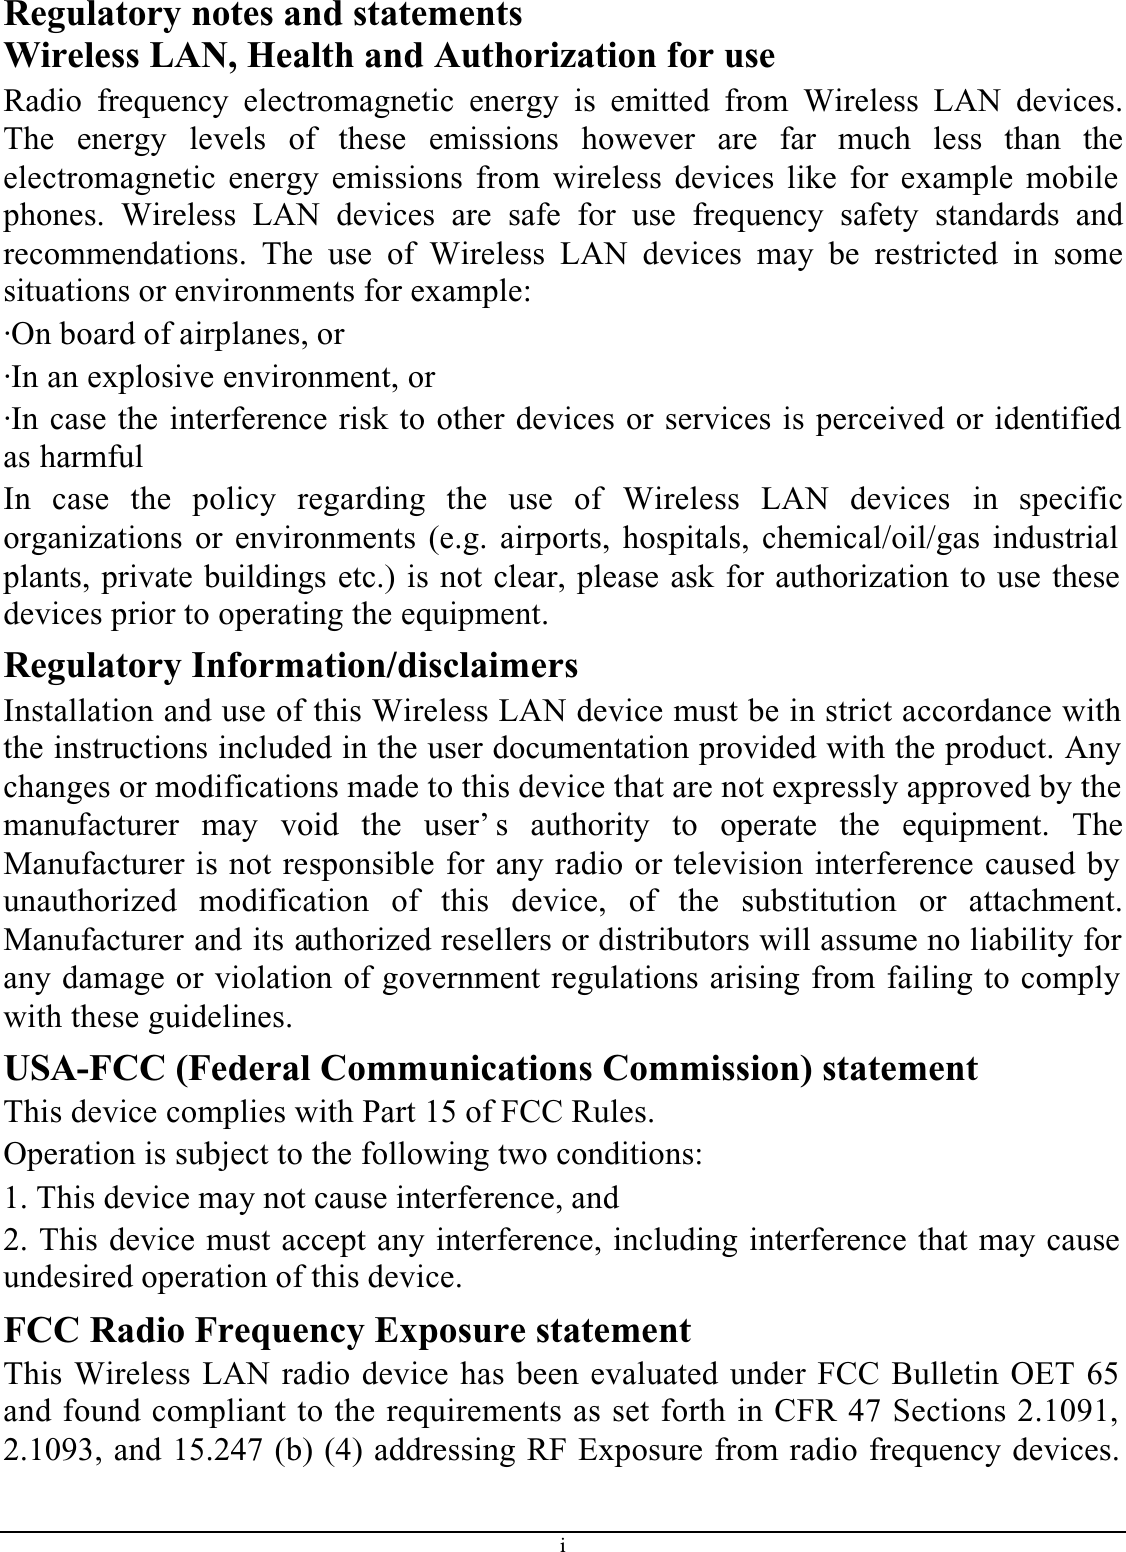 iRegulatory notes and statementsWireless LAN, Health and Authorization for useRadio frequency electromagnetic energy is emitted from Wireless LAN devices.The energy levels of these emissions however are far much less than theelectromagnetic energy emissions from wireless devices like for example mobile phones. Wireless LAN devices are safe for use frequency safety standards andrecommendations. The use of Wireless LAN devices may be restricted in somesituations or environments for example:·On board of airplanes, or·In an explosive environment, or·In case the interference risk to other devices or services is perceived or identified as harmfulIn case the policy regarding the use of Wireless LAN devices in specificorganizations or environments (e.g. airports, hospitals, chemical/oil/gas industrial plants, private buildings etc.) is not clear, please ask for authorization to use these devices prior to operating the equipment.Regulatory Information/disclaimersInstallation and use of this Wireless LAN device must be in strict accordance with the instructions included in the user documentation provided with the product. Any changes or modifications made to this device that are not expressly approved by themanufacturer may void the user’ s authority to operate the equipment. TheManufacturer is not responsible for any radio or television interference caused by unauthorized modification of this device, of the substitution or attachment.Manufacturer and its authorized resellers or distributors will assume no liability for any damage or violation of government regulations arising from failing to comply with these guidelines.USA-FCC (Federal Communications Commission) statementThis device complies with Part 15 of FCC Rules.Operation is subject to the following two conditions:1. This device may not cause interference, and2. This device must accept any interference, including interference that may cause undesired operation of this device.FCC Radio Frequency Exposure statementThis Wireless LAN radio device has been evaluated under FCC Bulletin OET 65 and found compliant to the requirements as set forth in CFR 47 Sections 2.1091, 2.1093, and 15.247 (b) (4) addressing RF Exposure from radio frequency devices. 